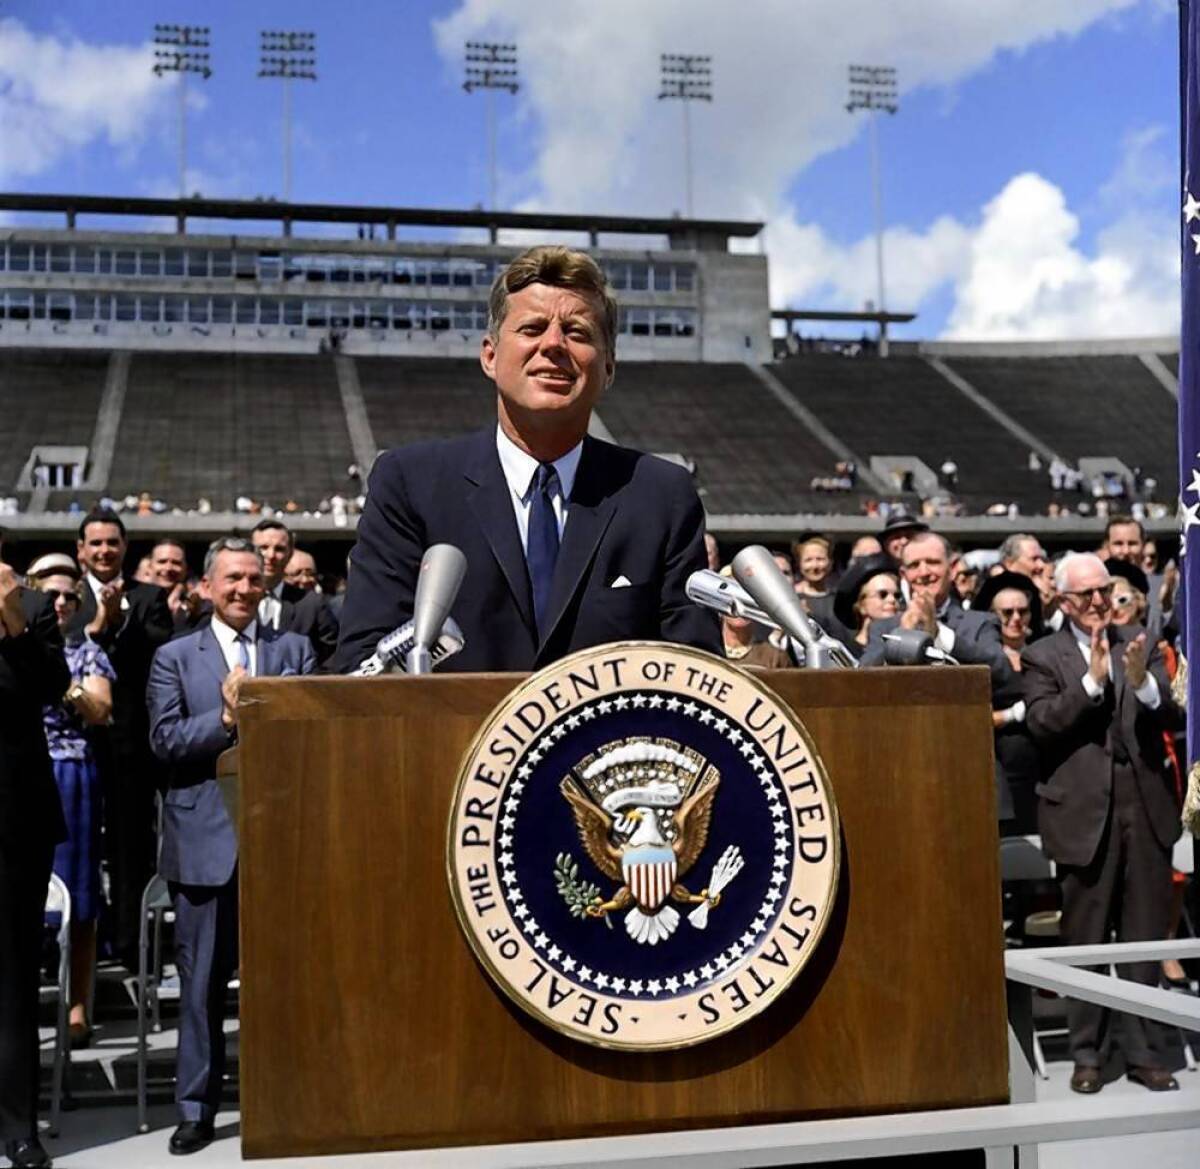 This year marks the 50th anniversary of John F. Kennedy's assassination in Dallas.